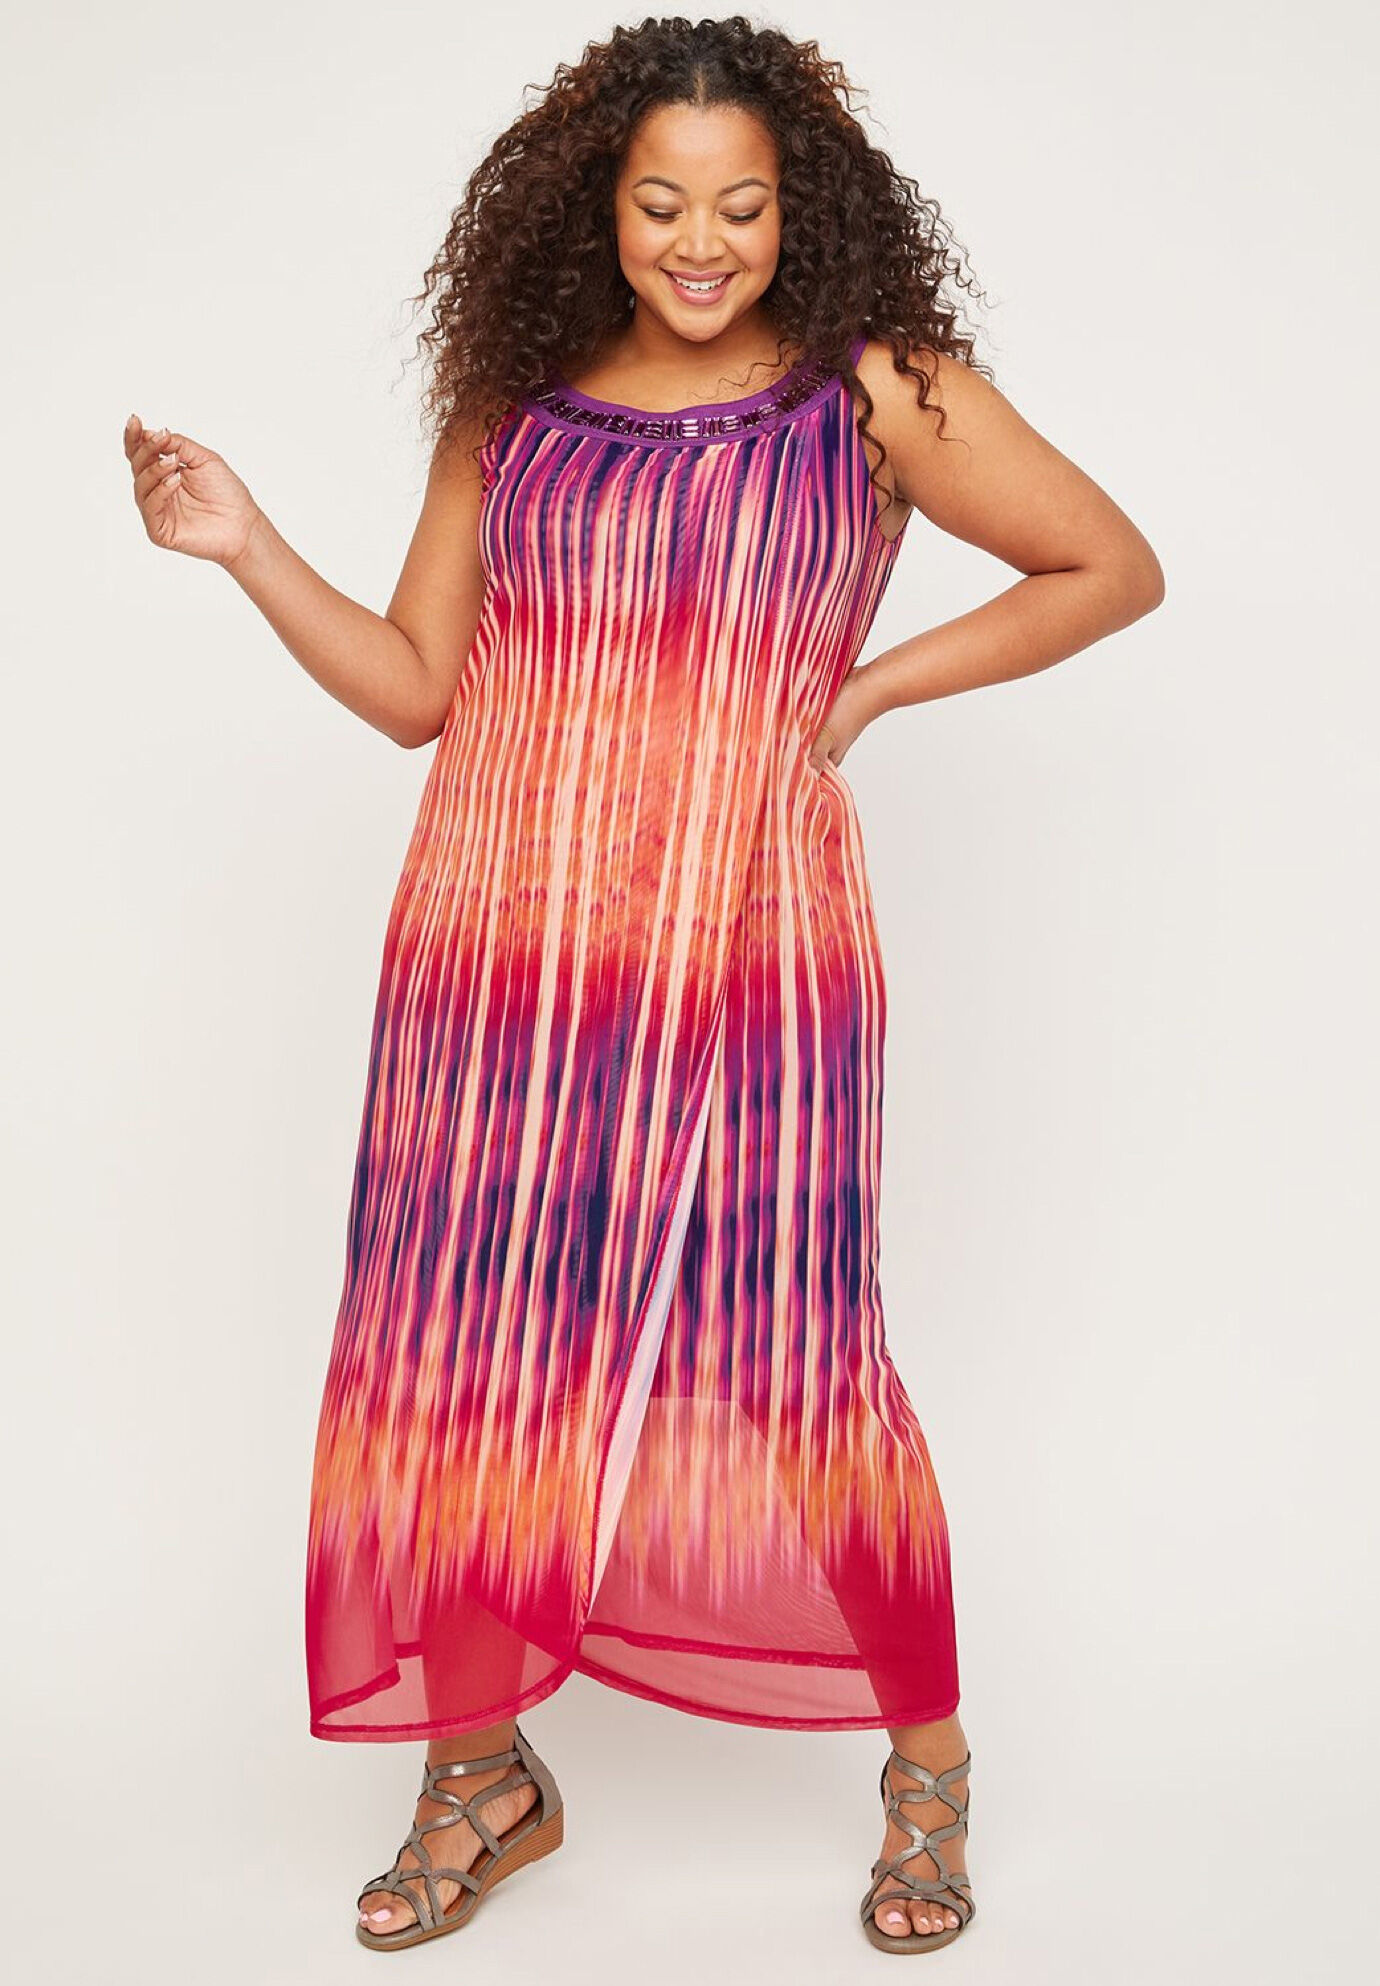 Clearance Plus Size Dresses for Women ...